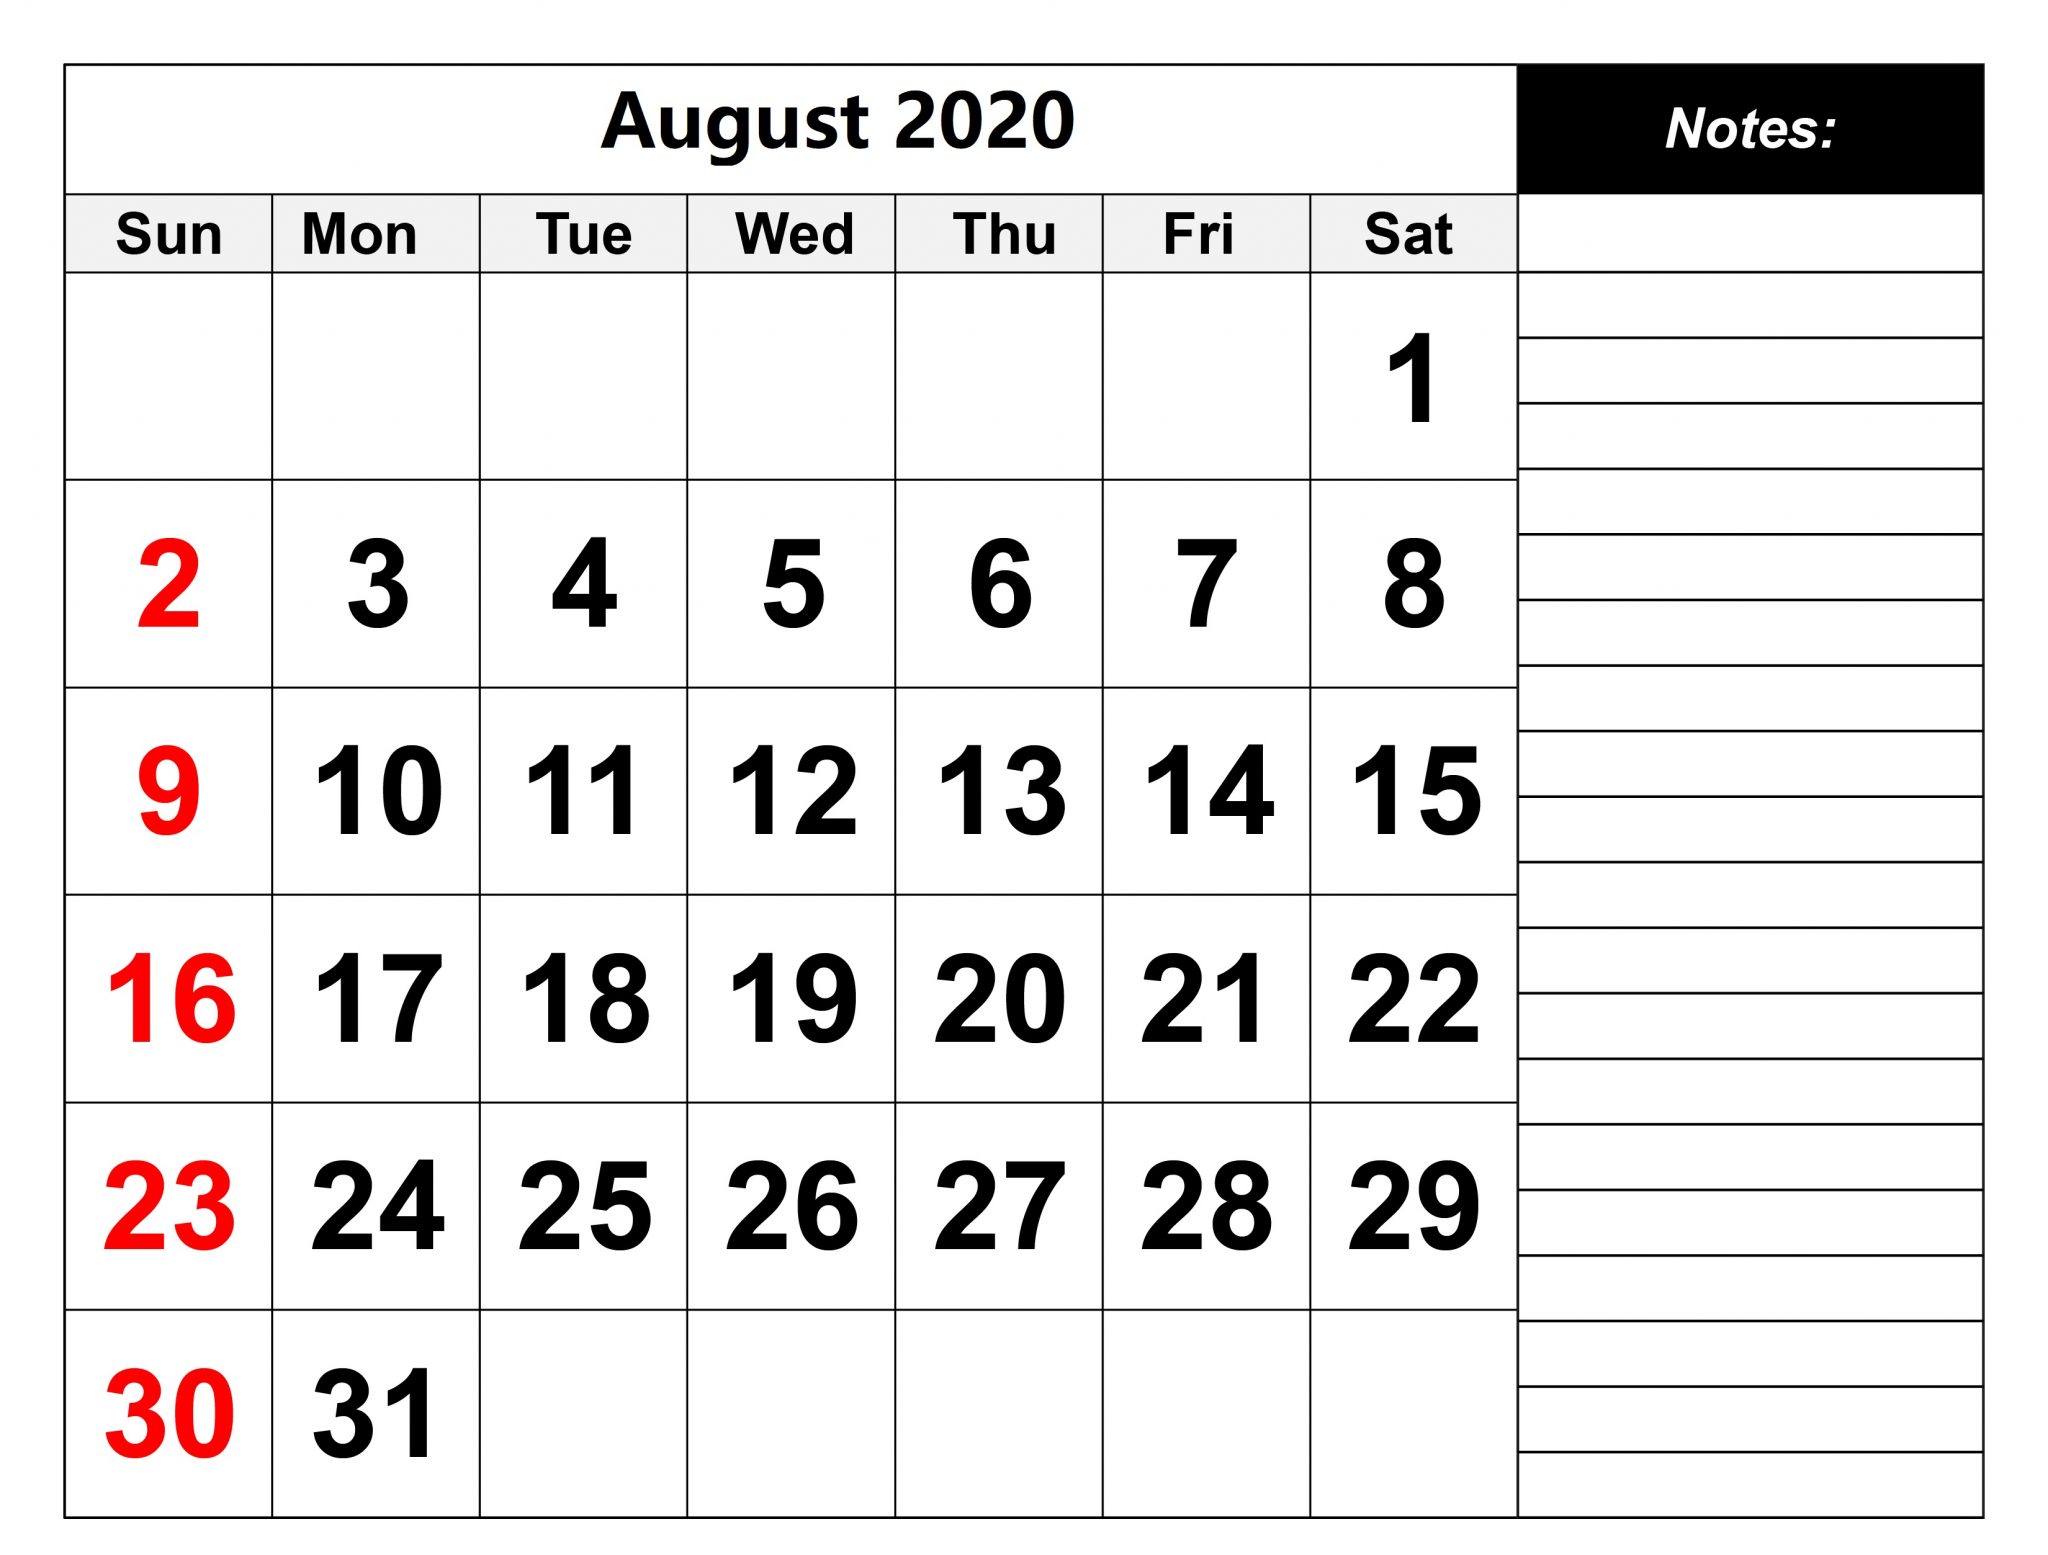 August 2020 Calendar With Notes